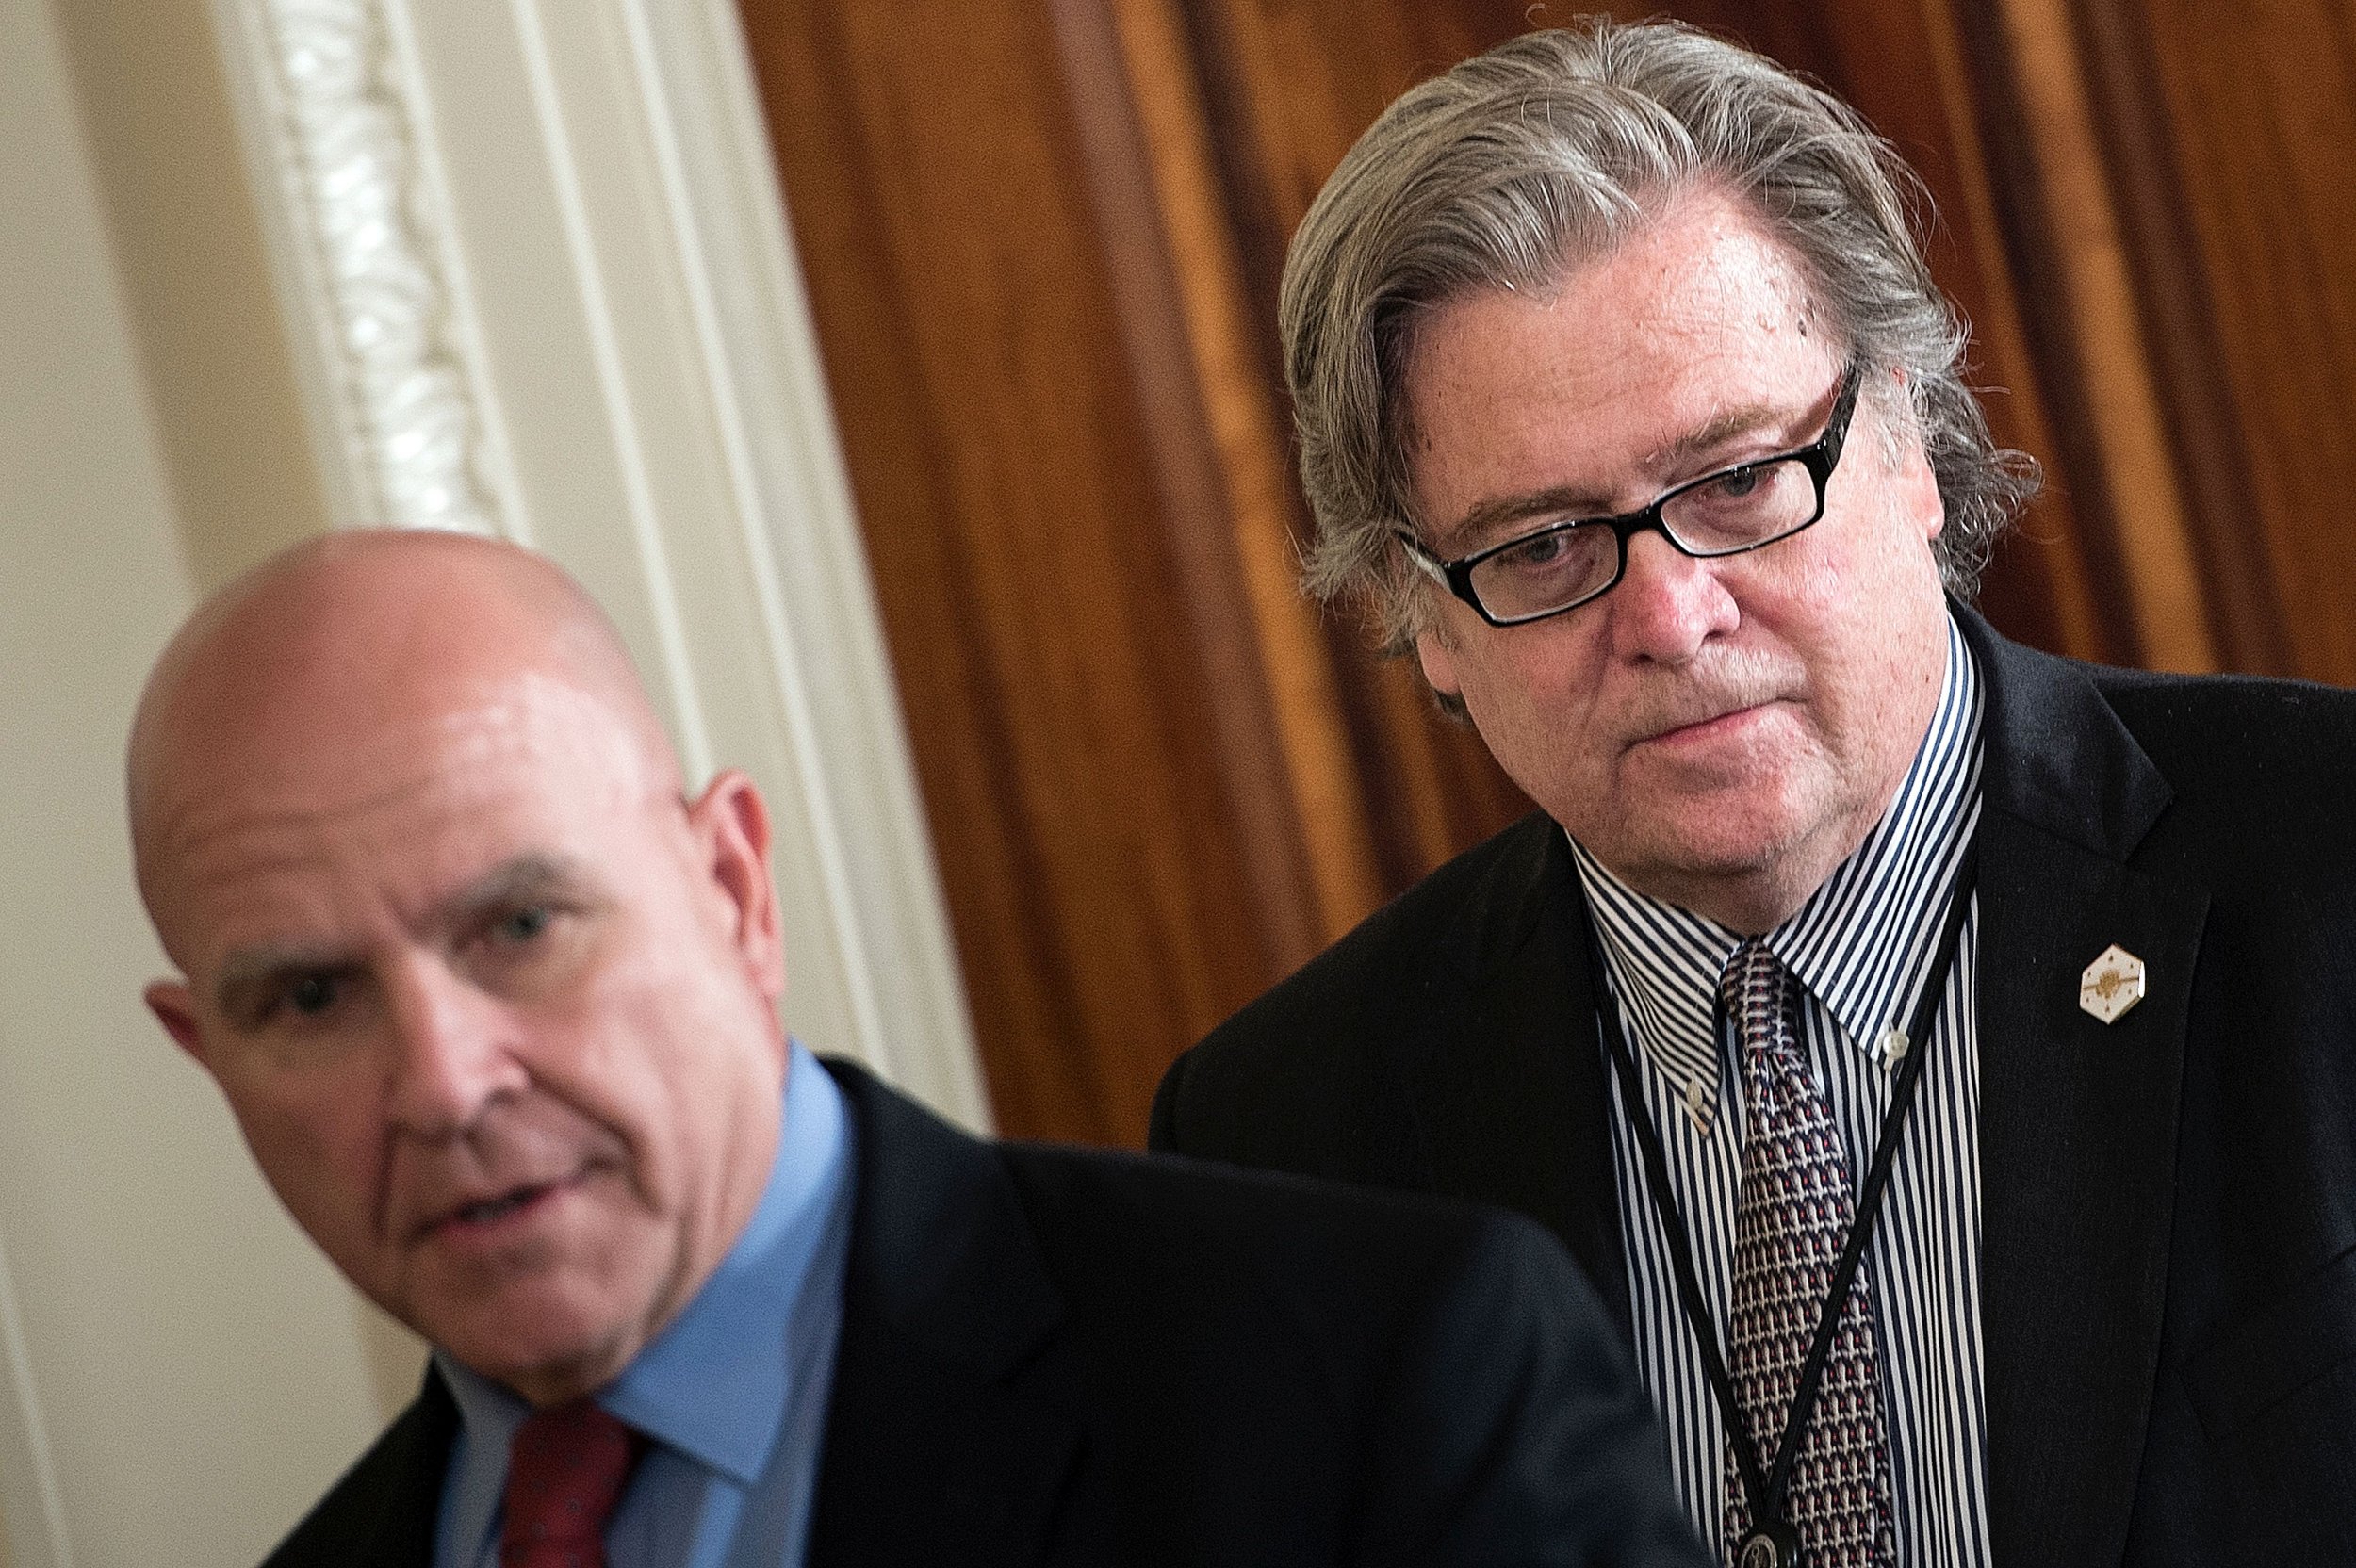 Bannon and H.R. McMaster